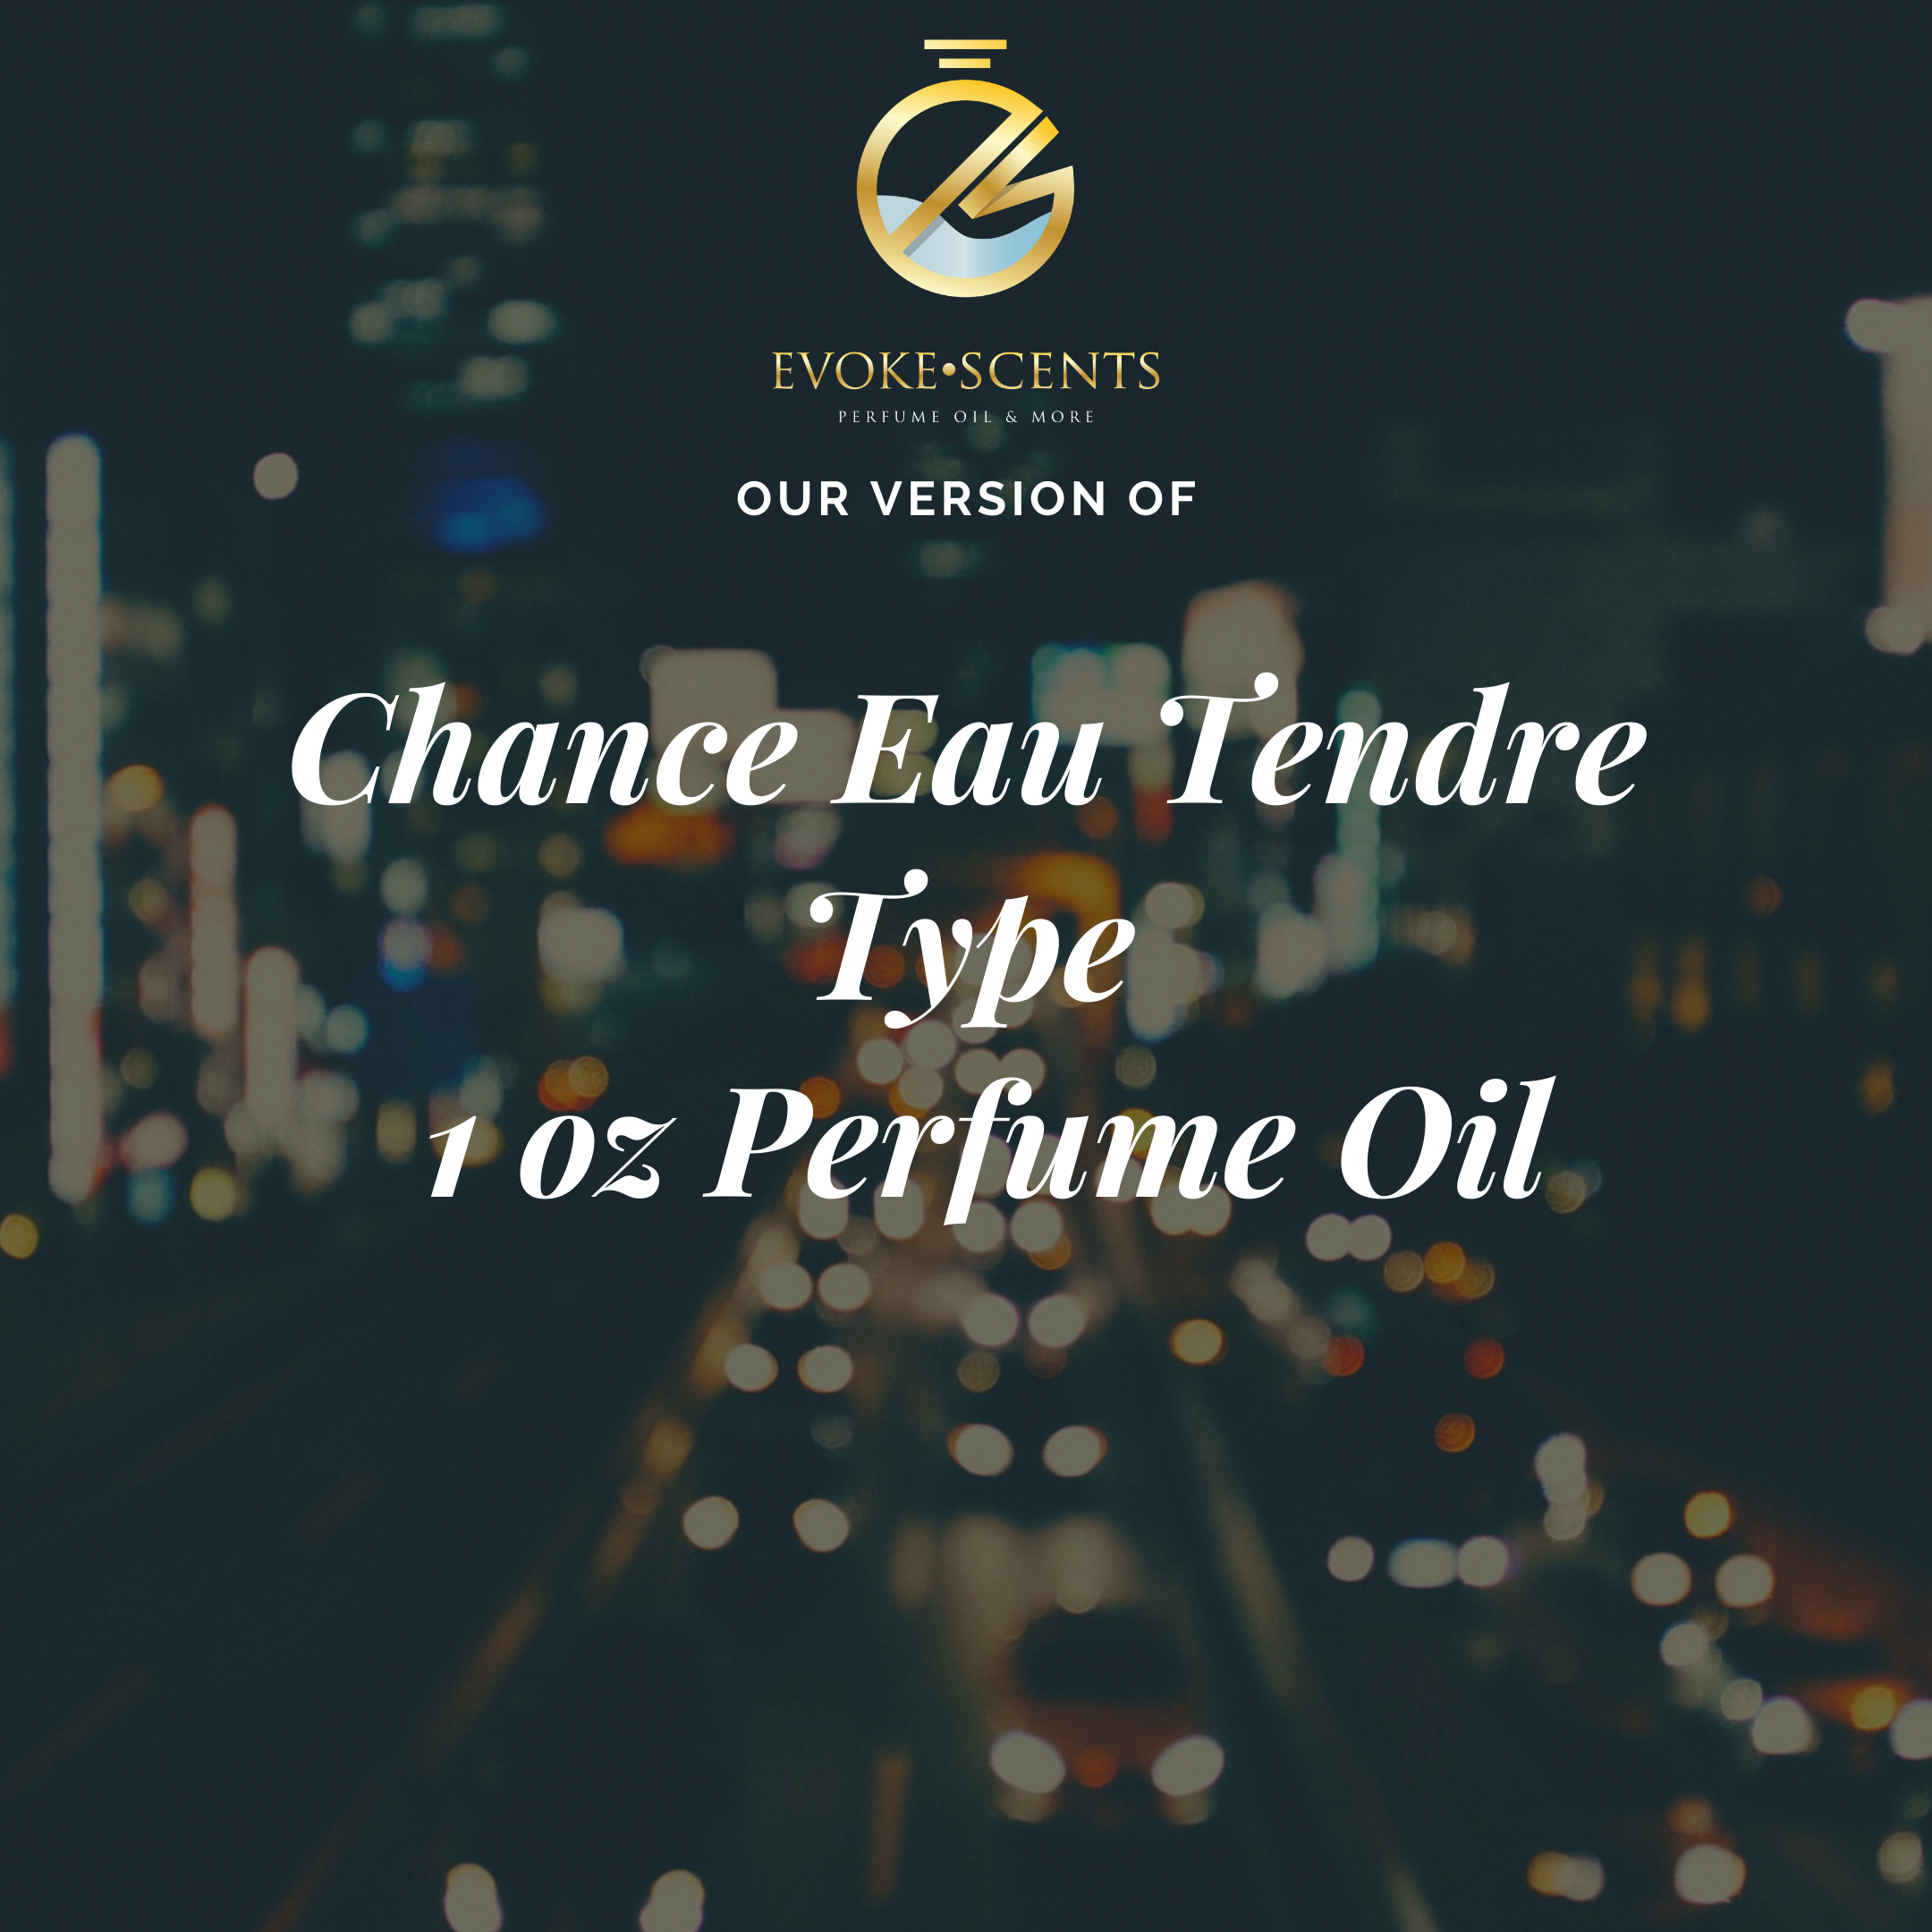 Royal Perfume's version of Chance Eau Tendre Type 100% Natural Pure Perfume  Oil